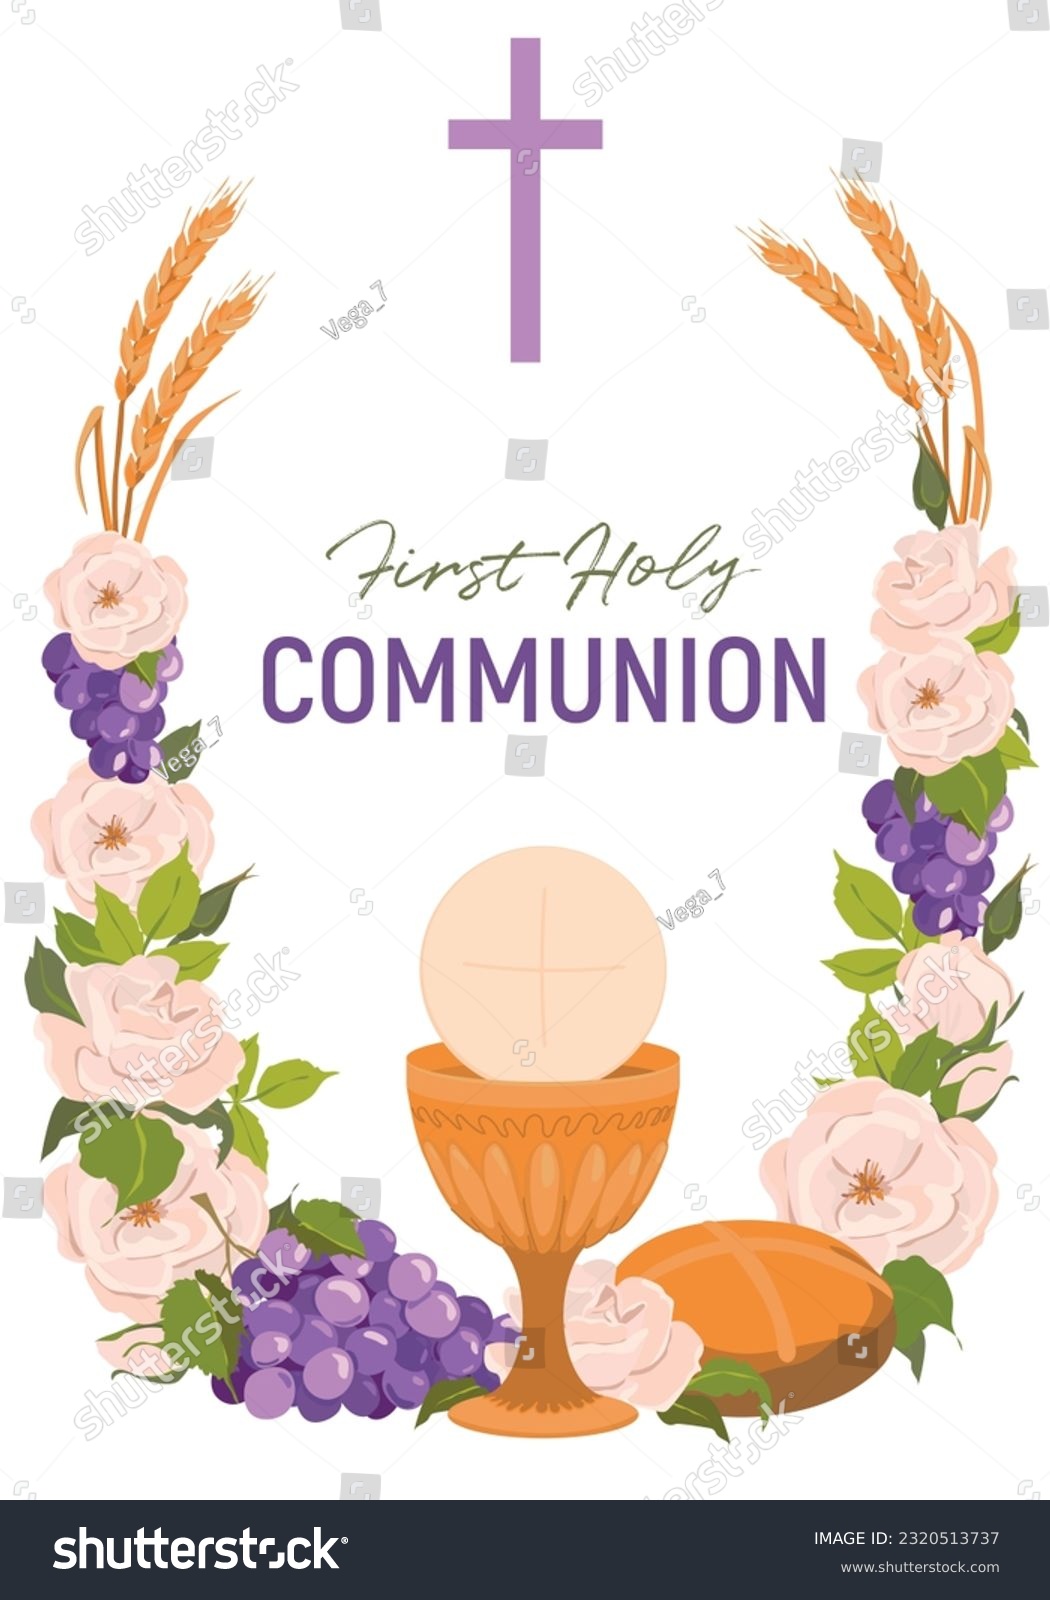 SVG of Symbols of the first communion. Vector. Golden bowl for wine, crucifix, bread, wine, grapes, white roses. An invitation to celebrate the Eucharist. Festively decorated altar. svg